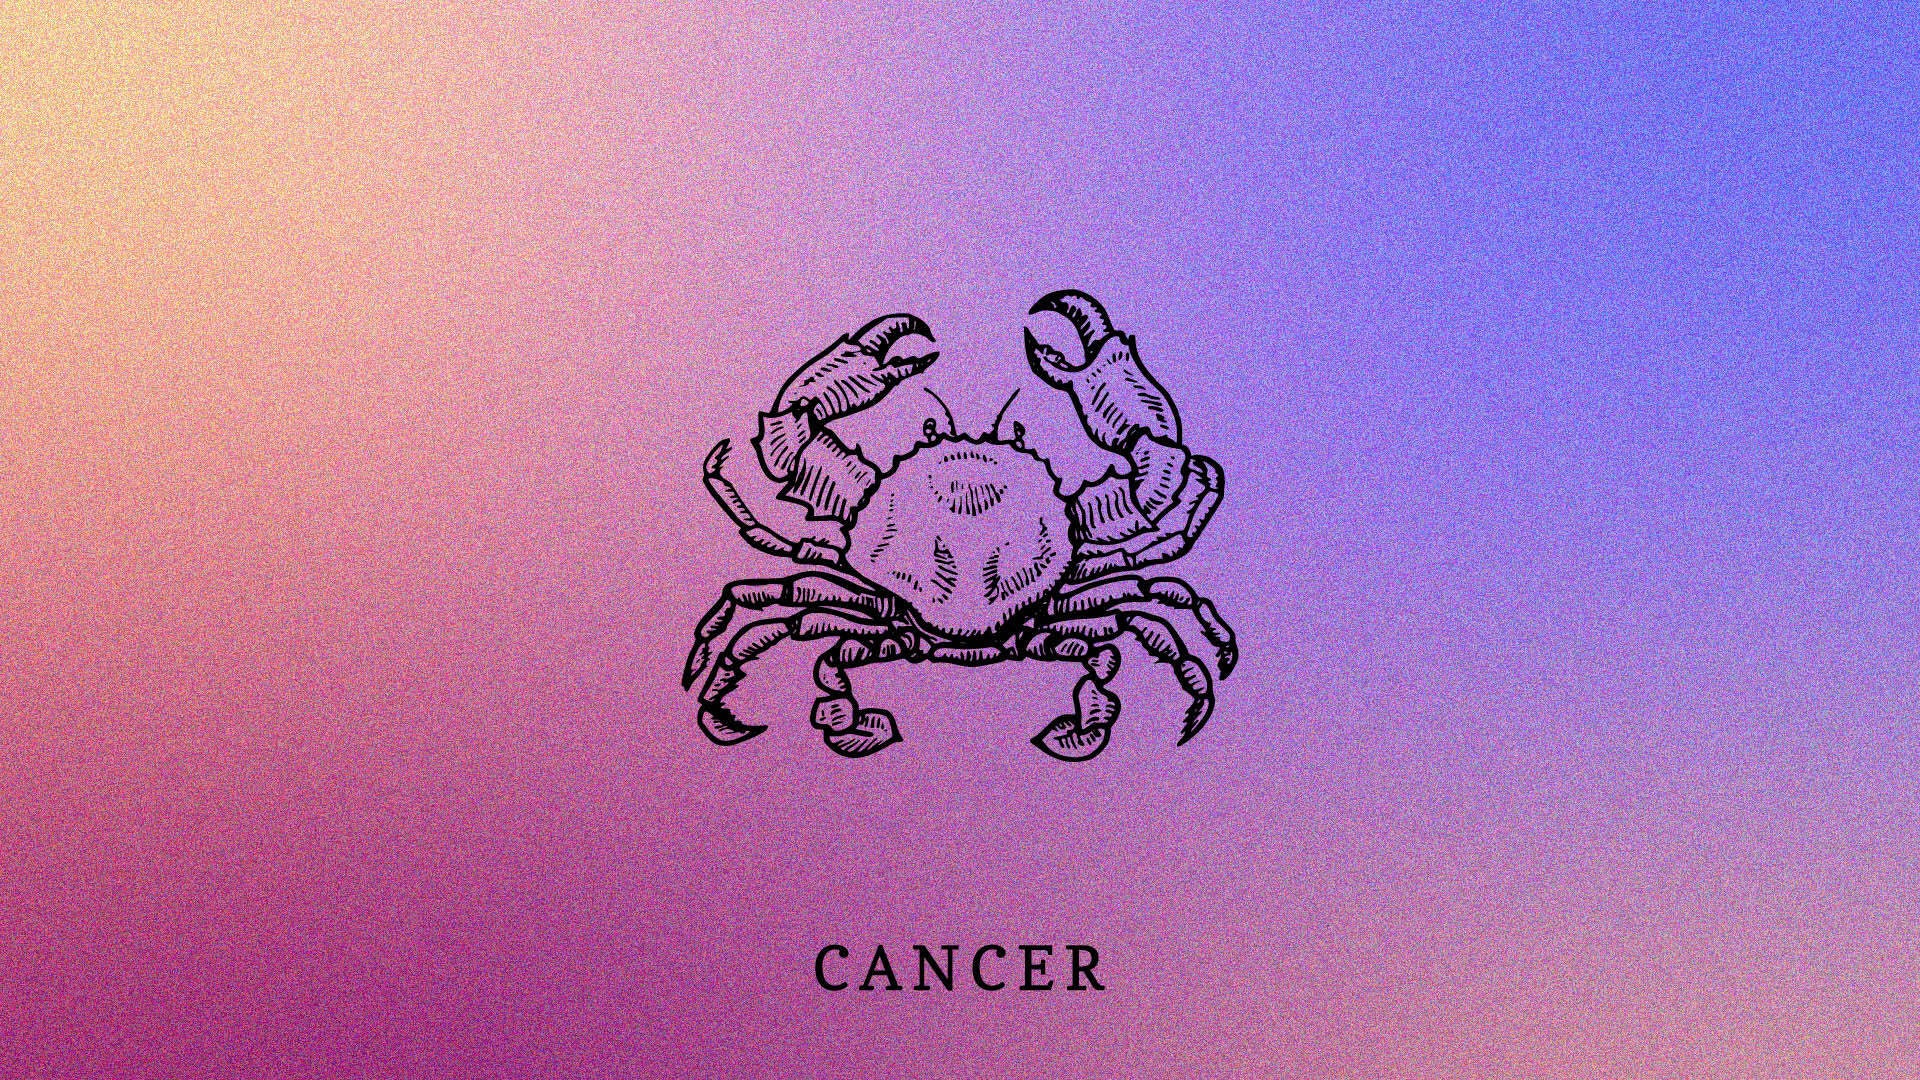 Cancer Season 2022 Horoscope: What to Expect Based on Your Zodiac Sign